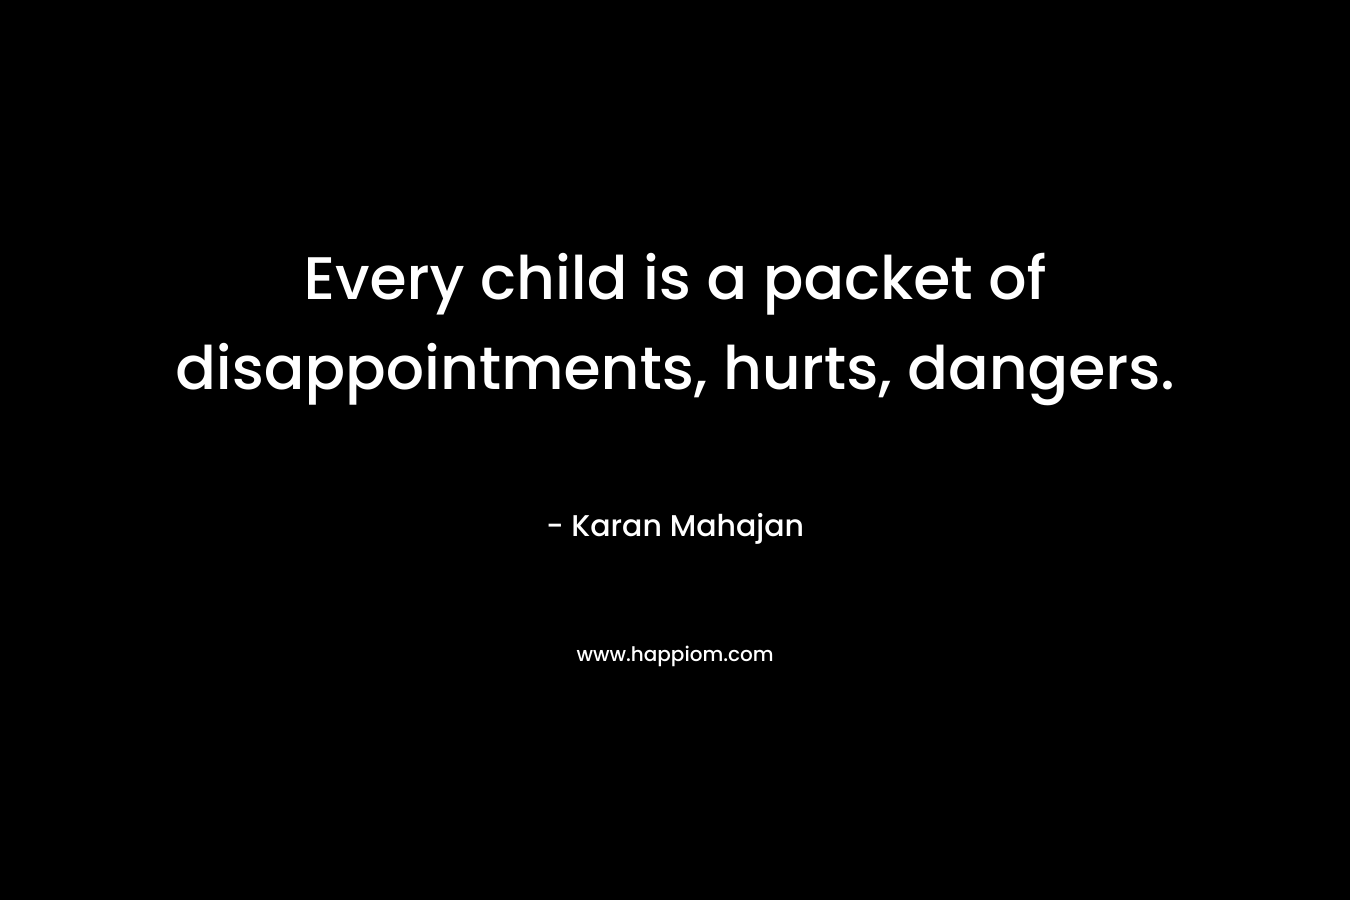 Every child is a packet of disappointments, hurts, dangers. – Karan Mahajan